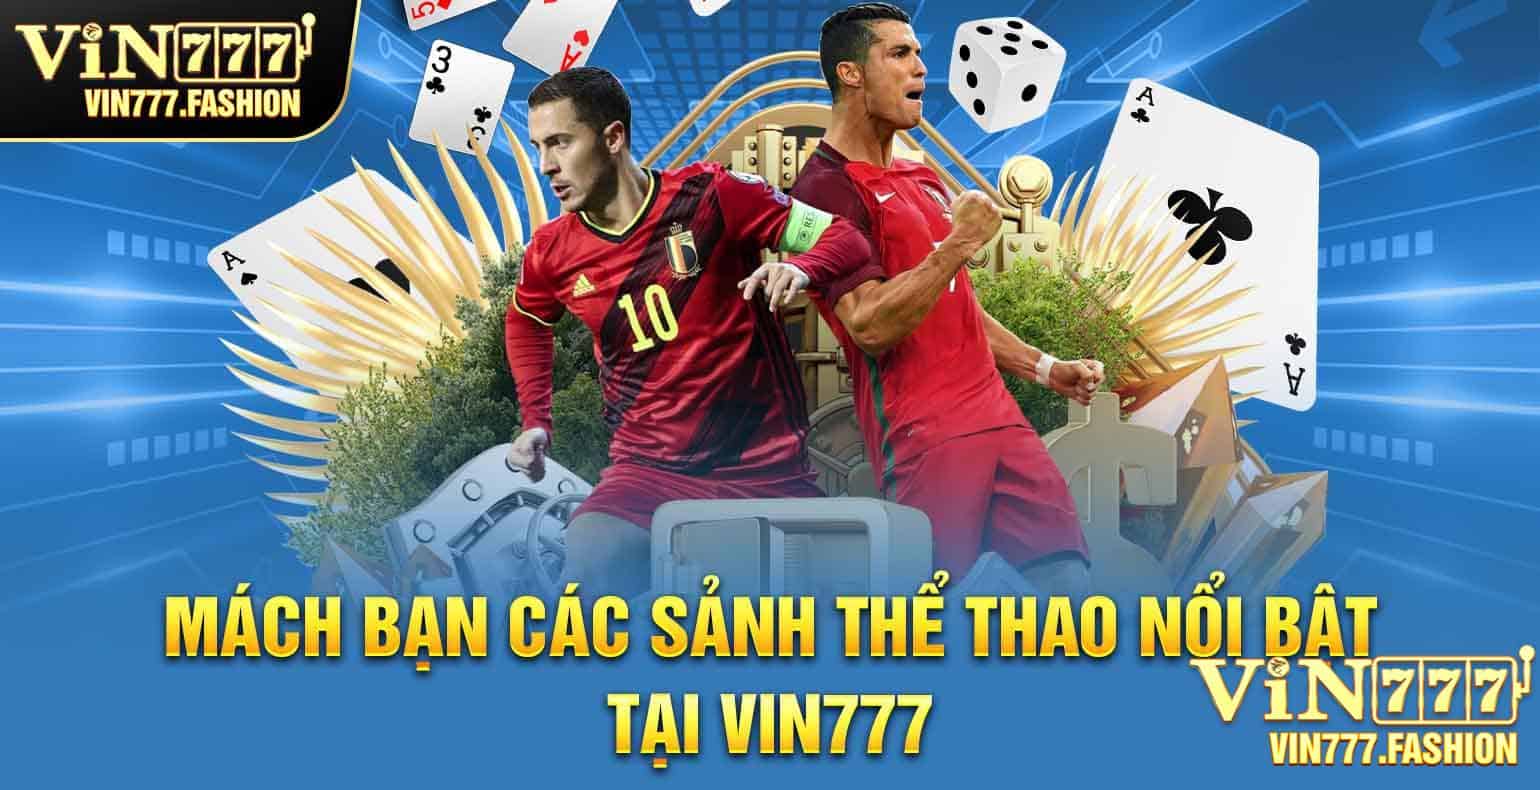 cac sanh the thao vin777